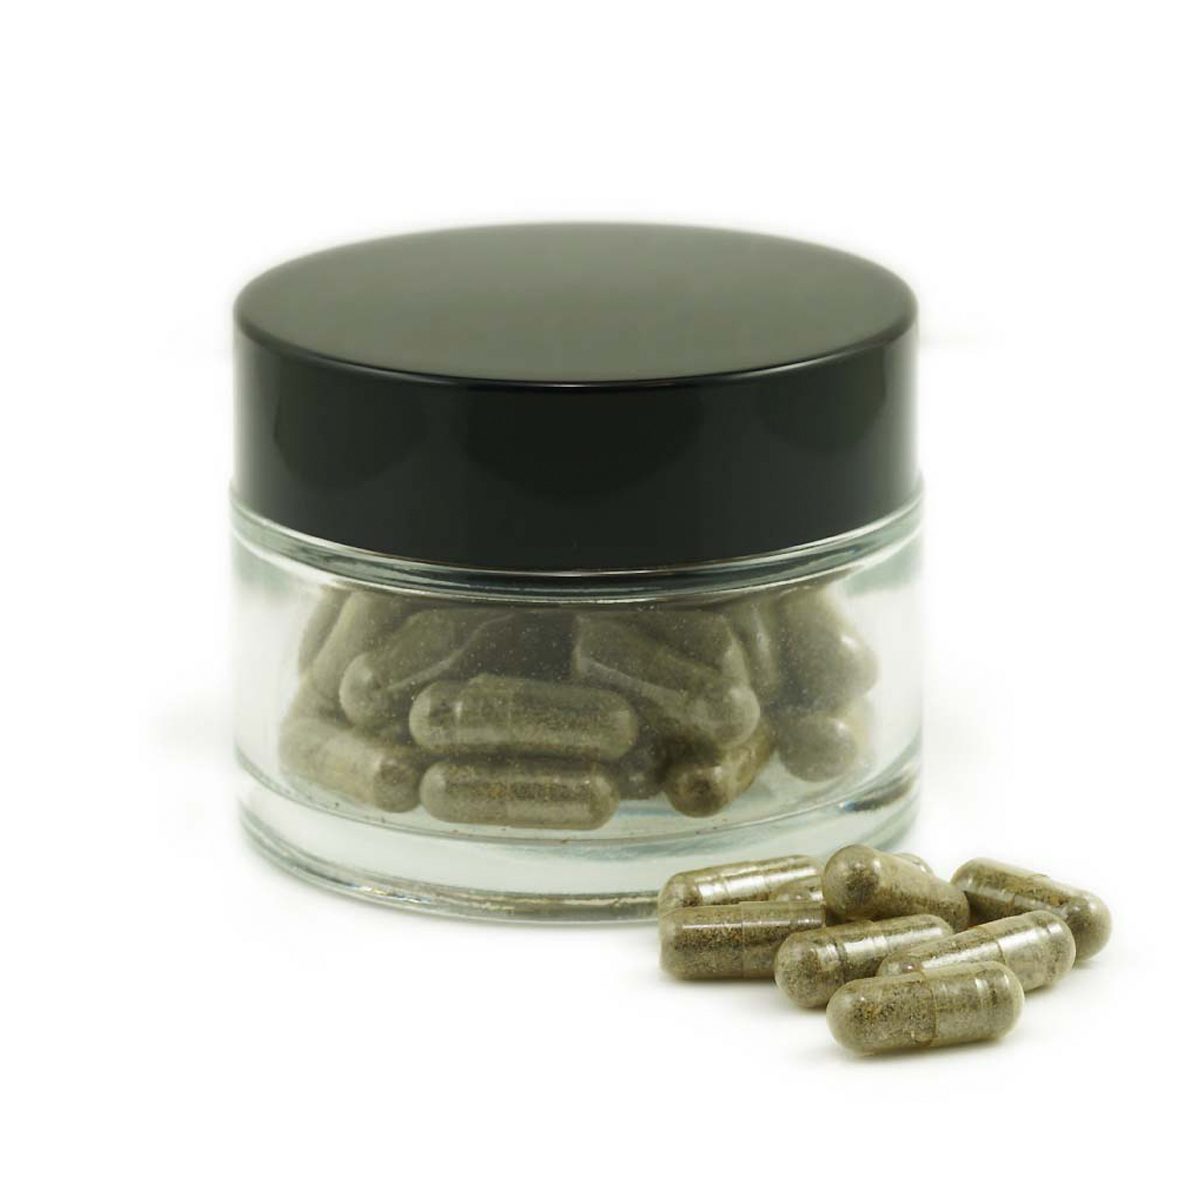 BUy-Shroom-Microdose-Capsules-x20-By-Lifted